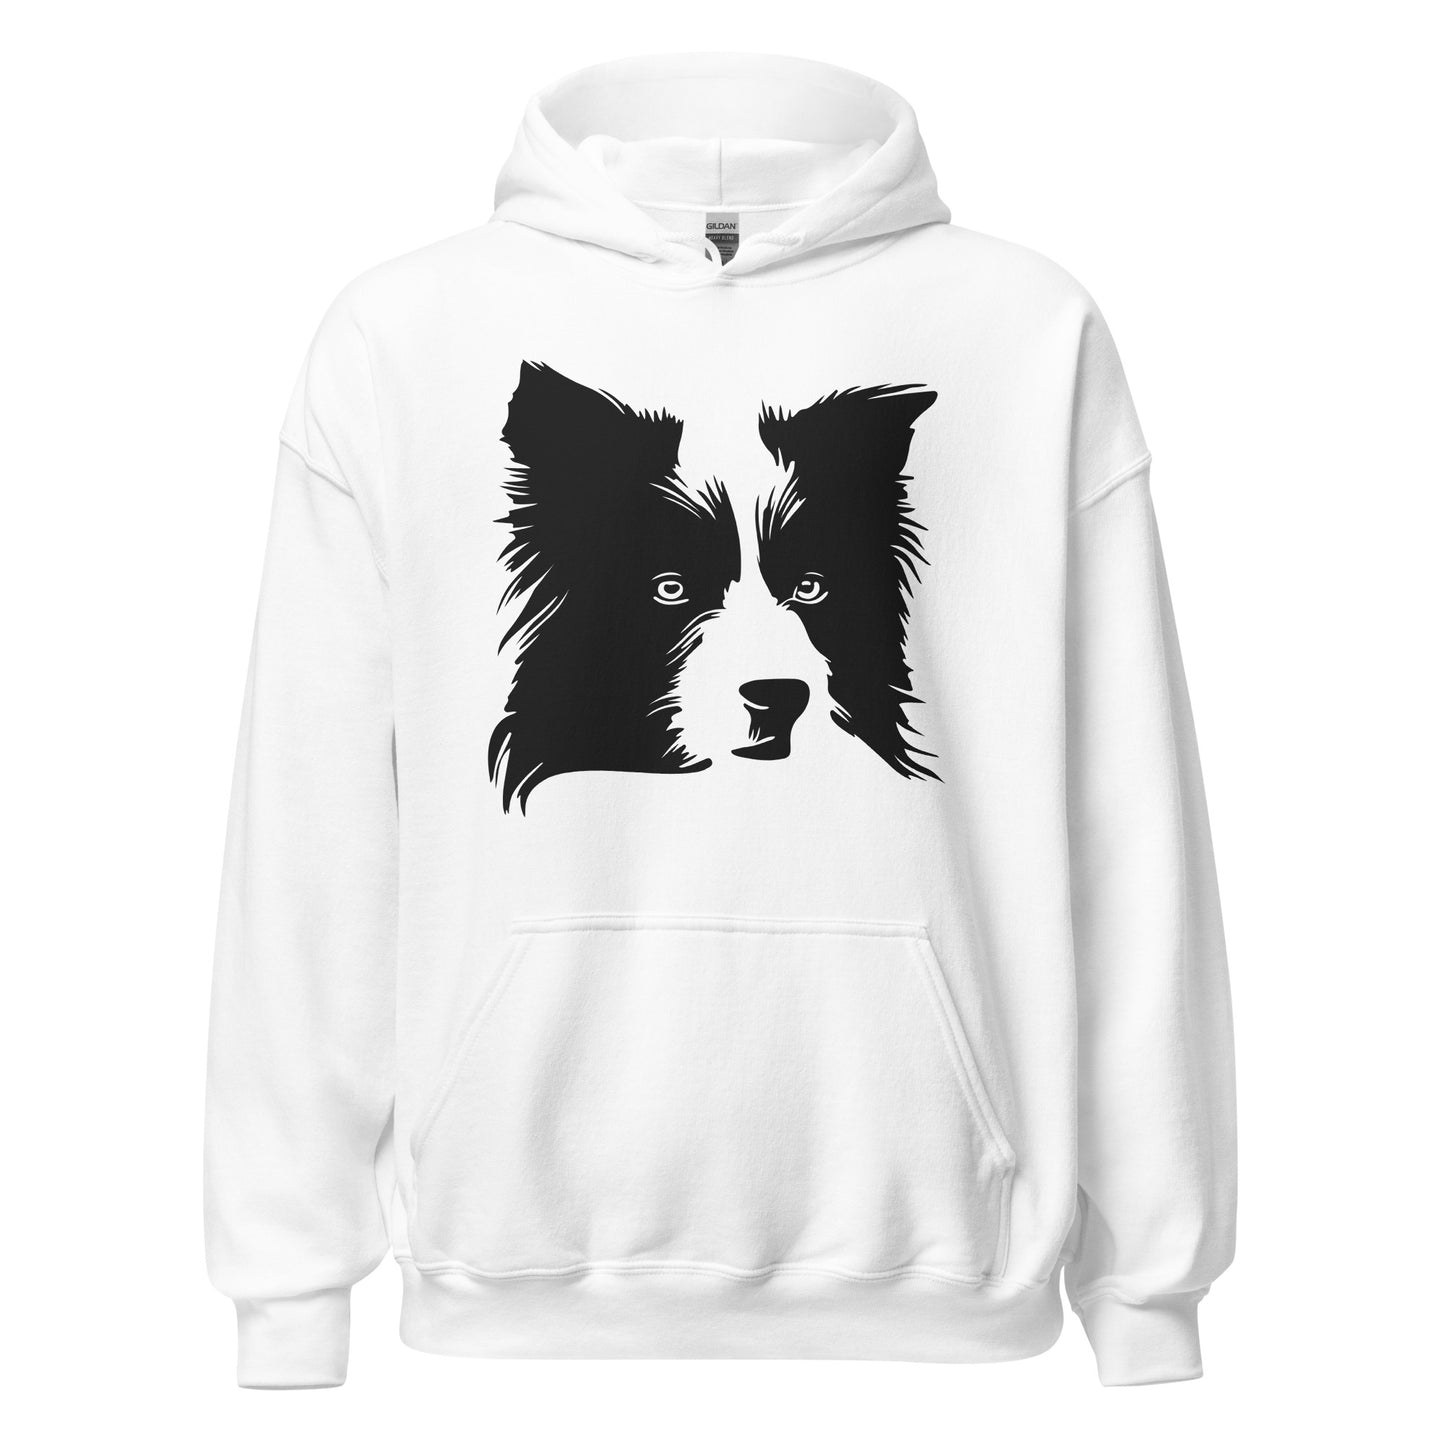 Black Border Collie face silhouette on unisex white hoodie